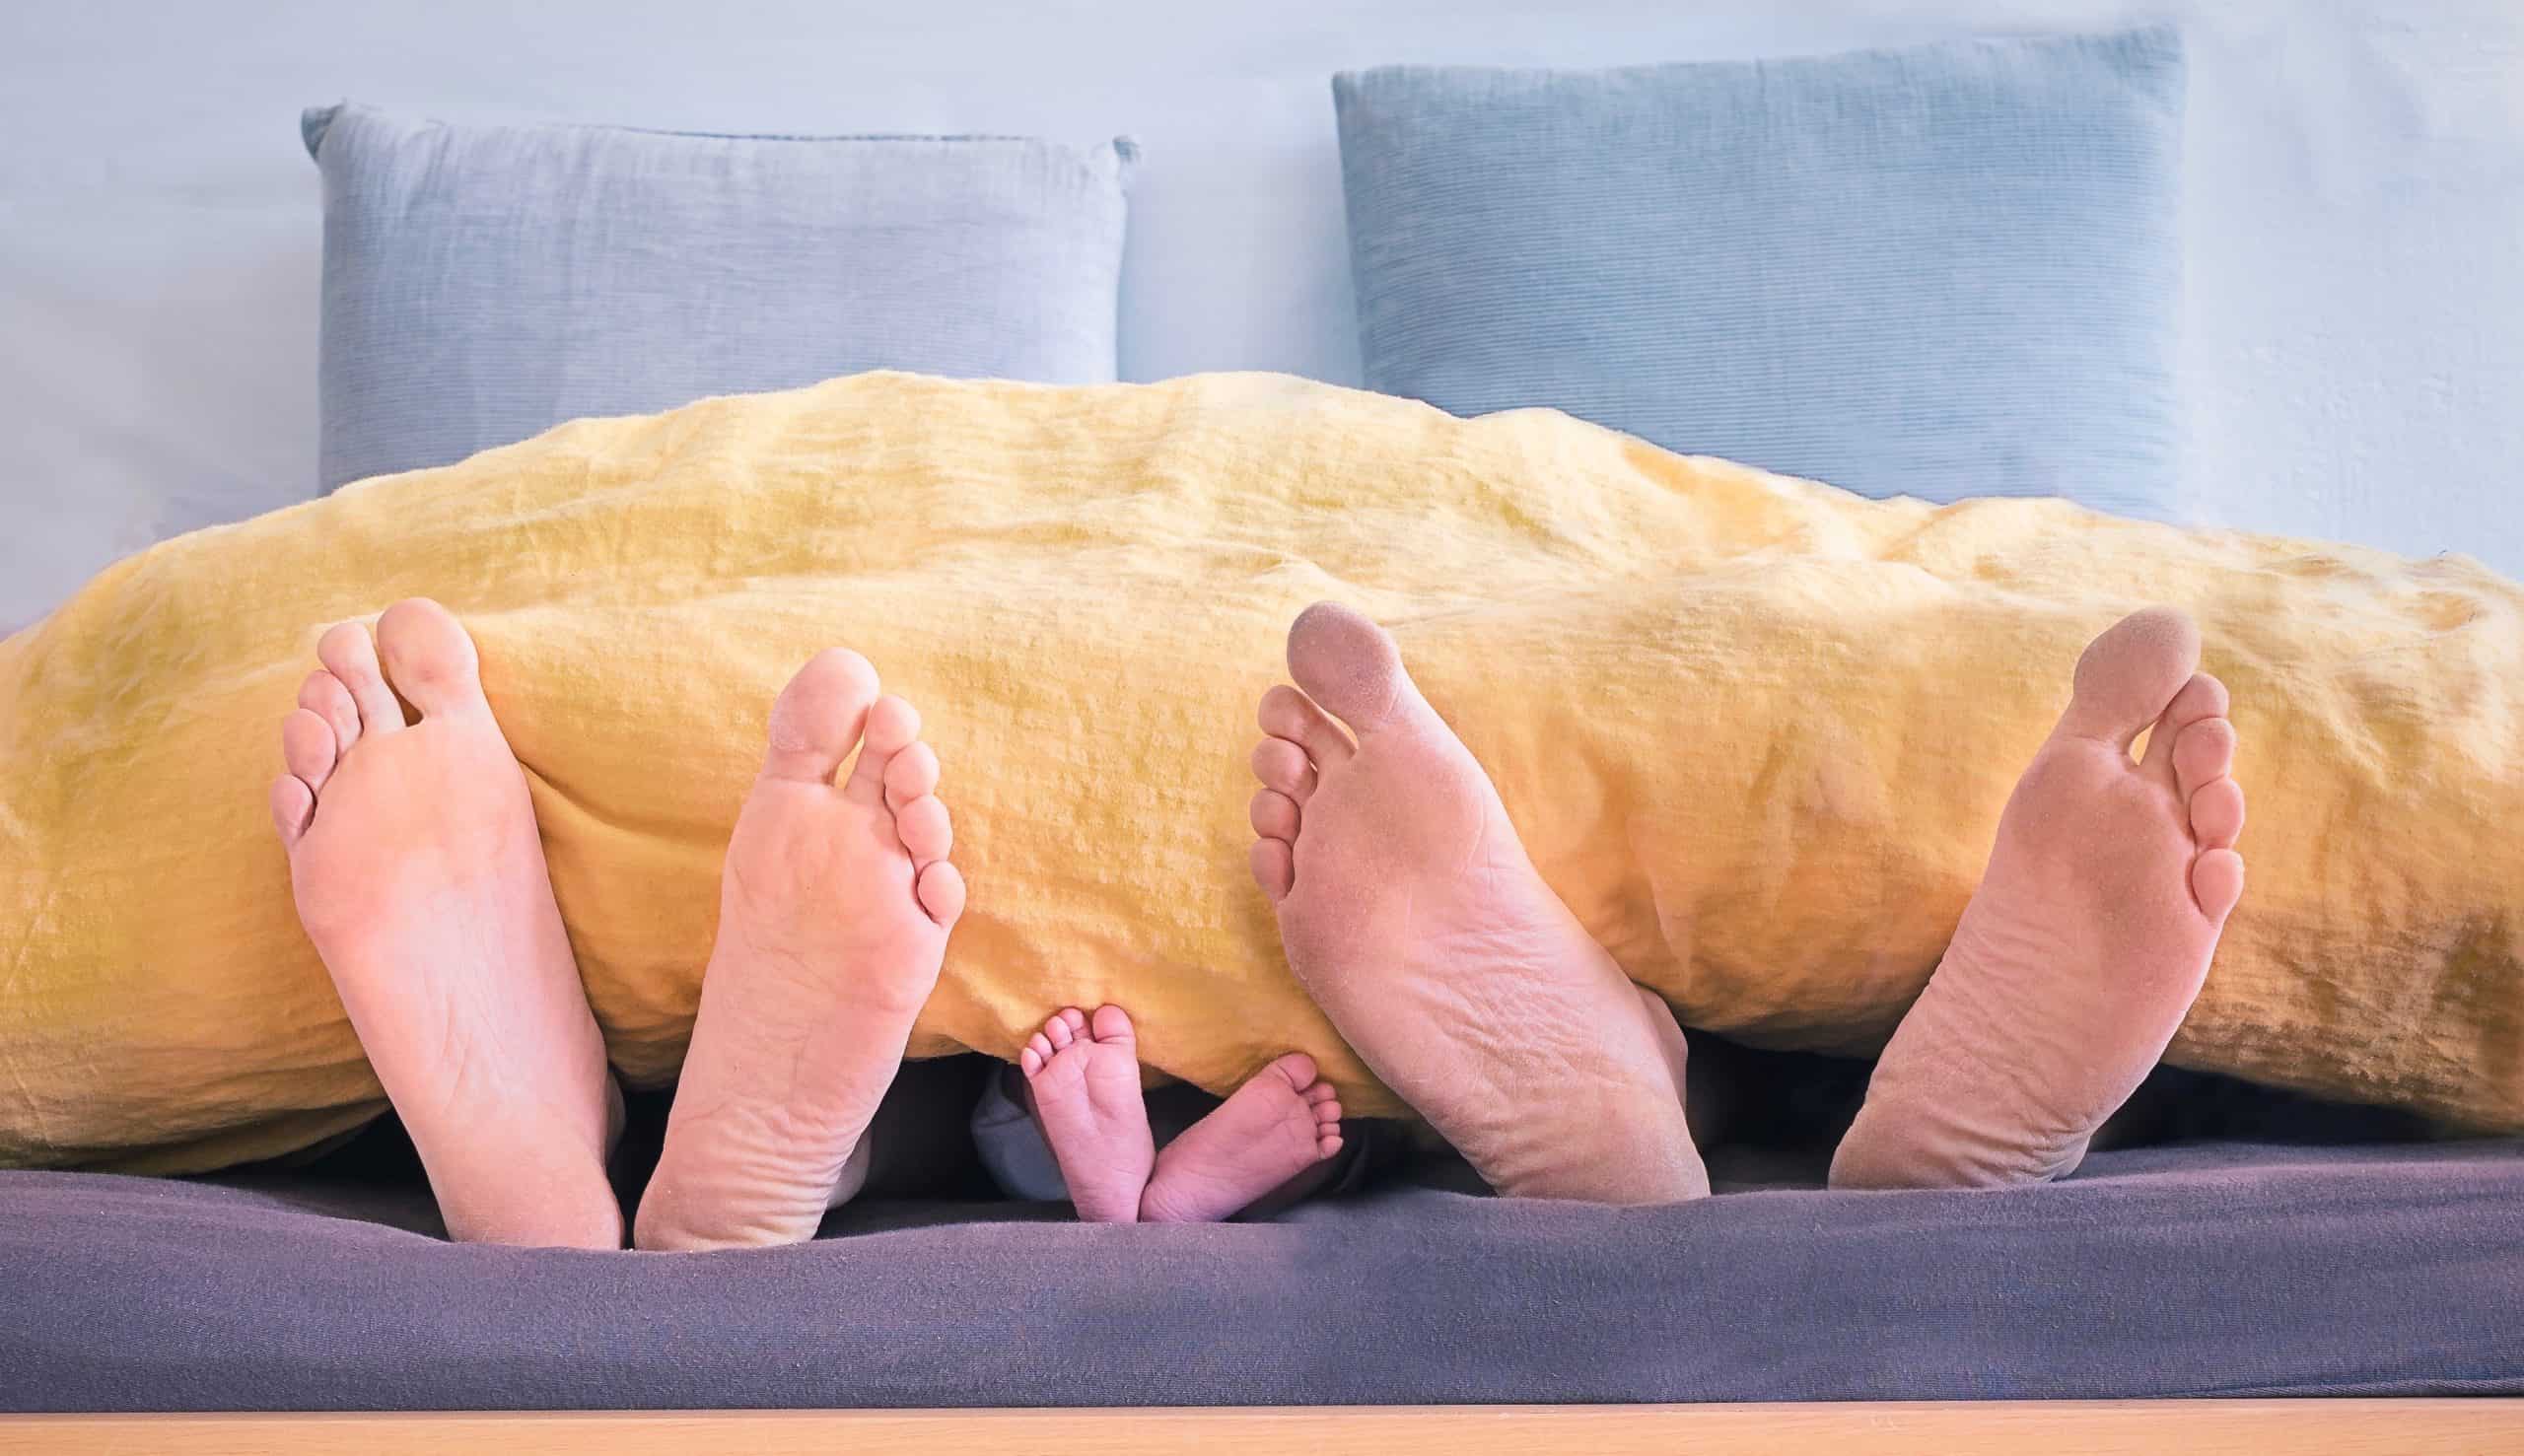 Family's feet sticking out of a blanket having a staycation with kids